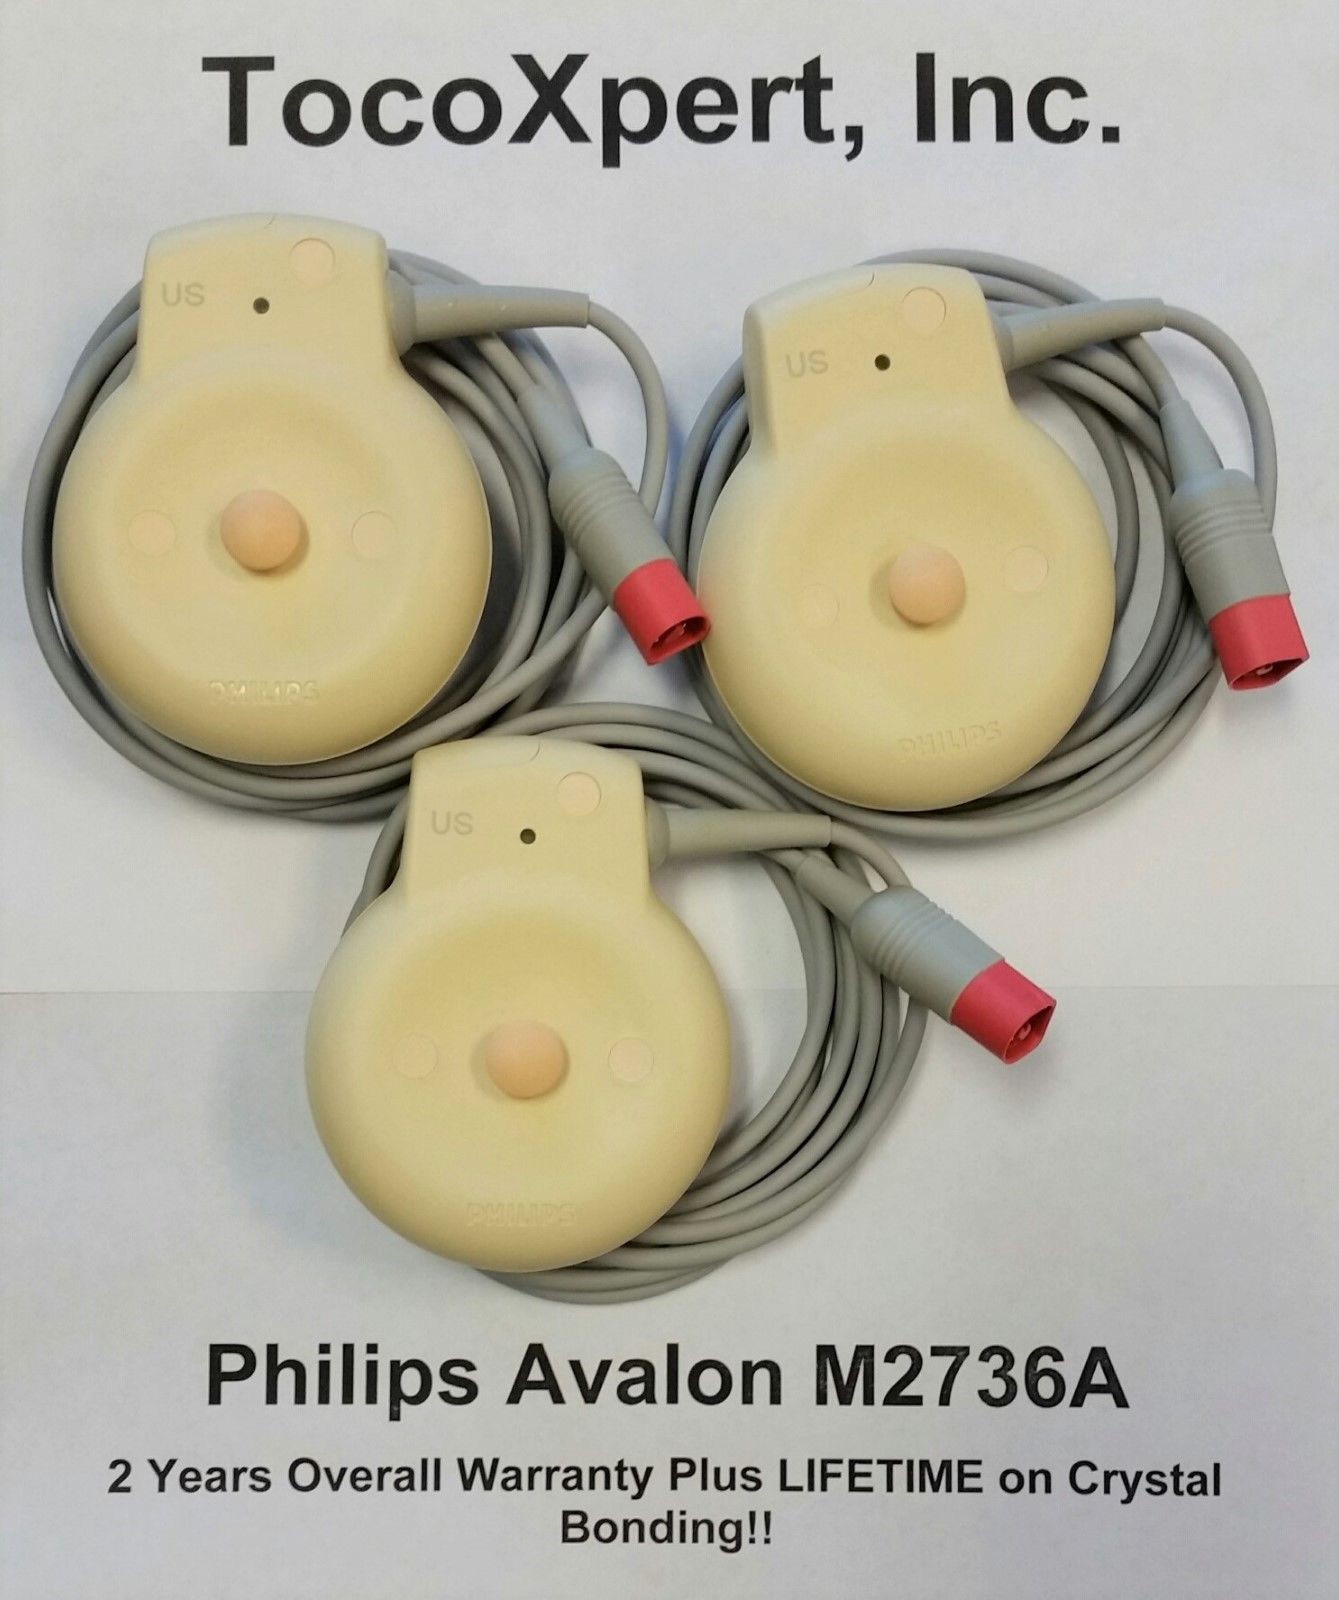 Philips M2736A Avalon Ultrasound Transducer Probe white table two